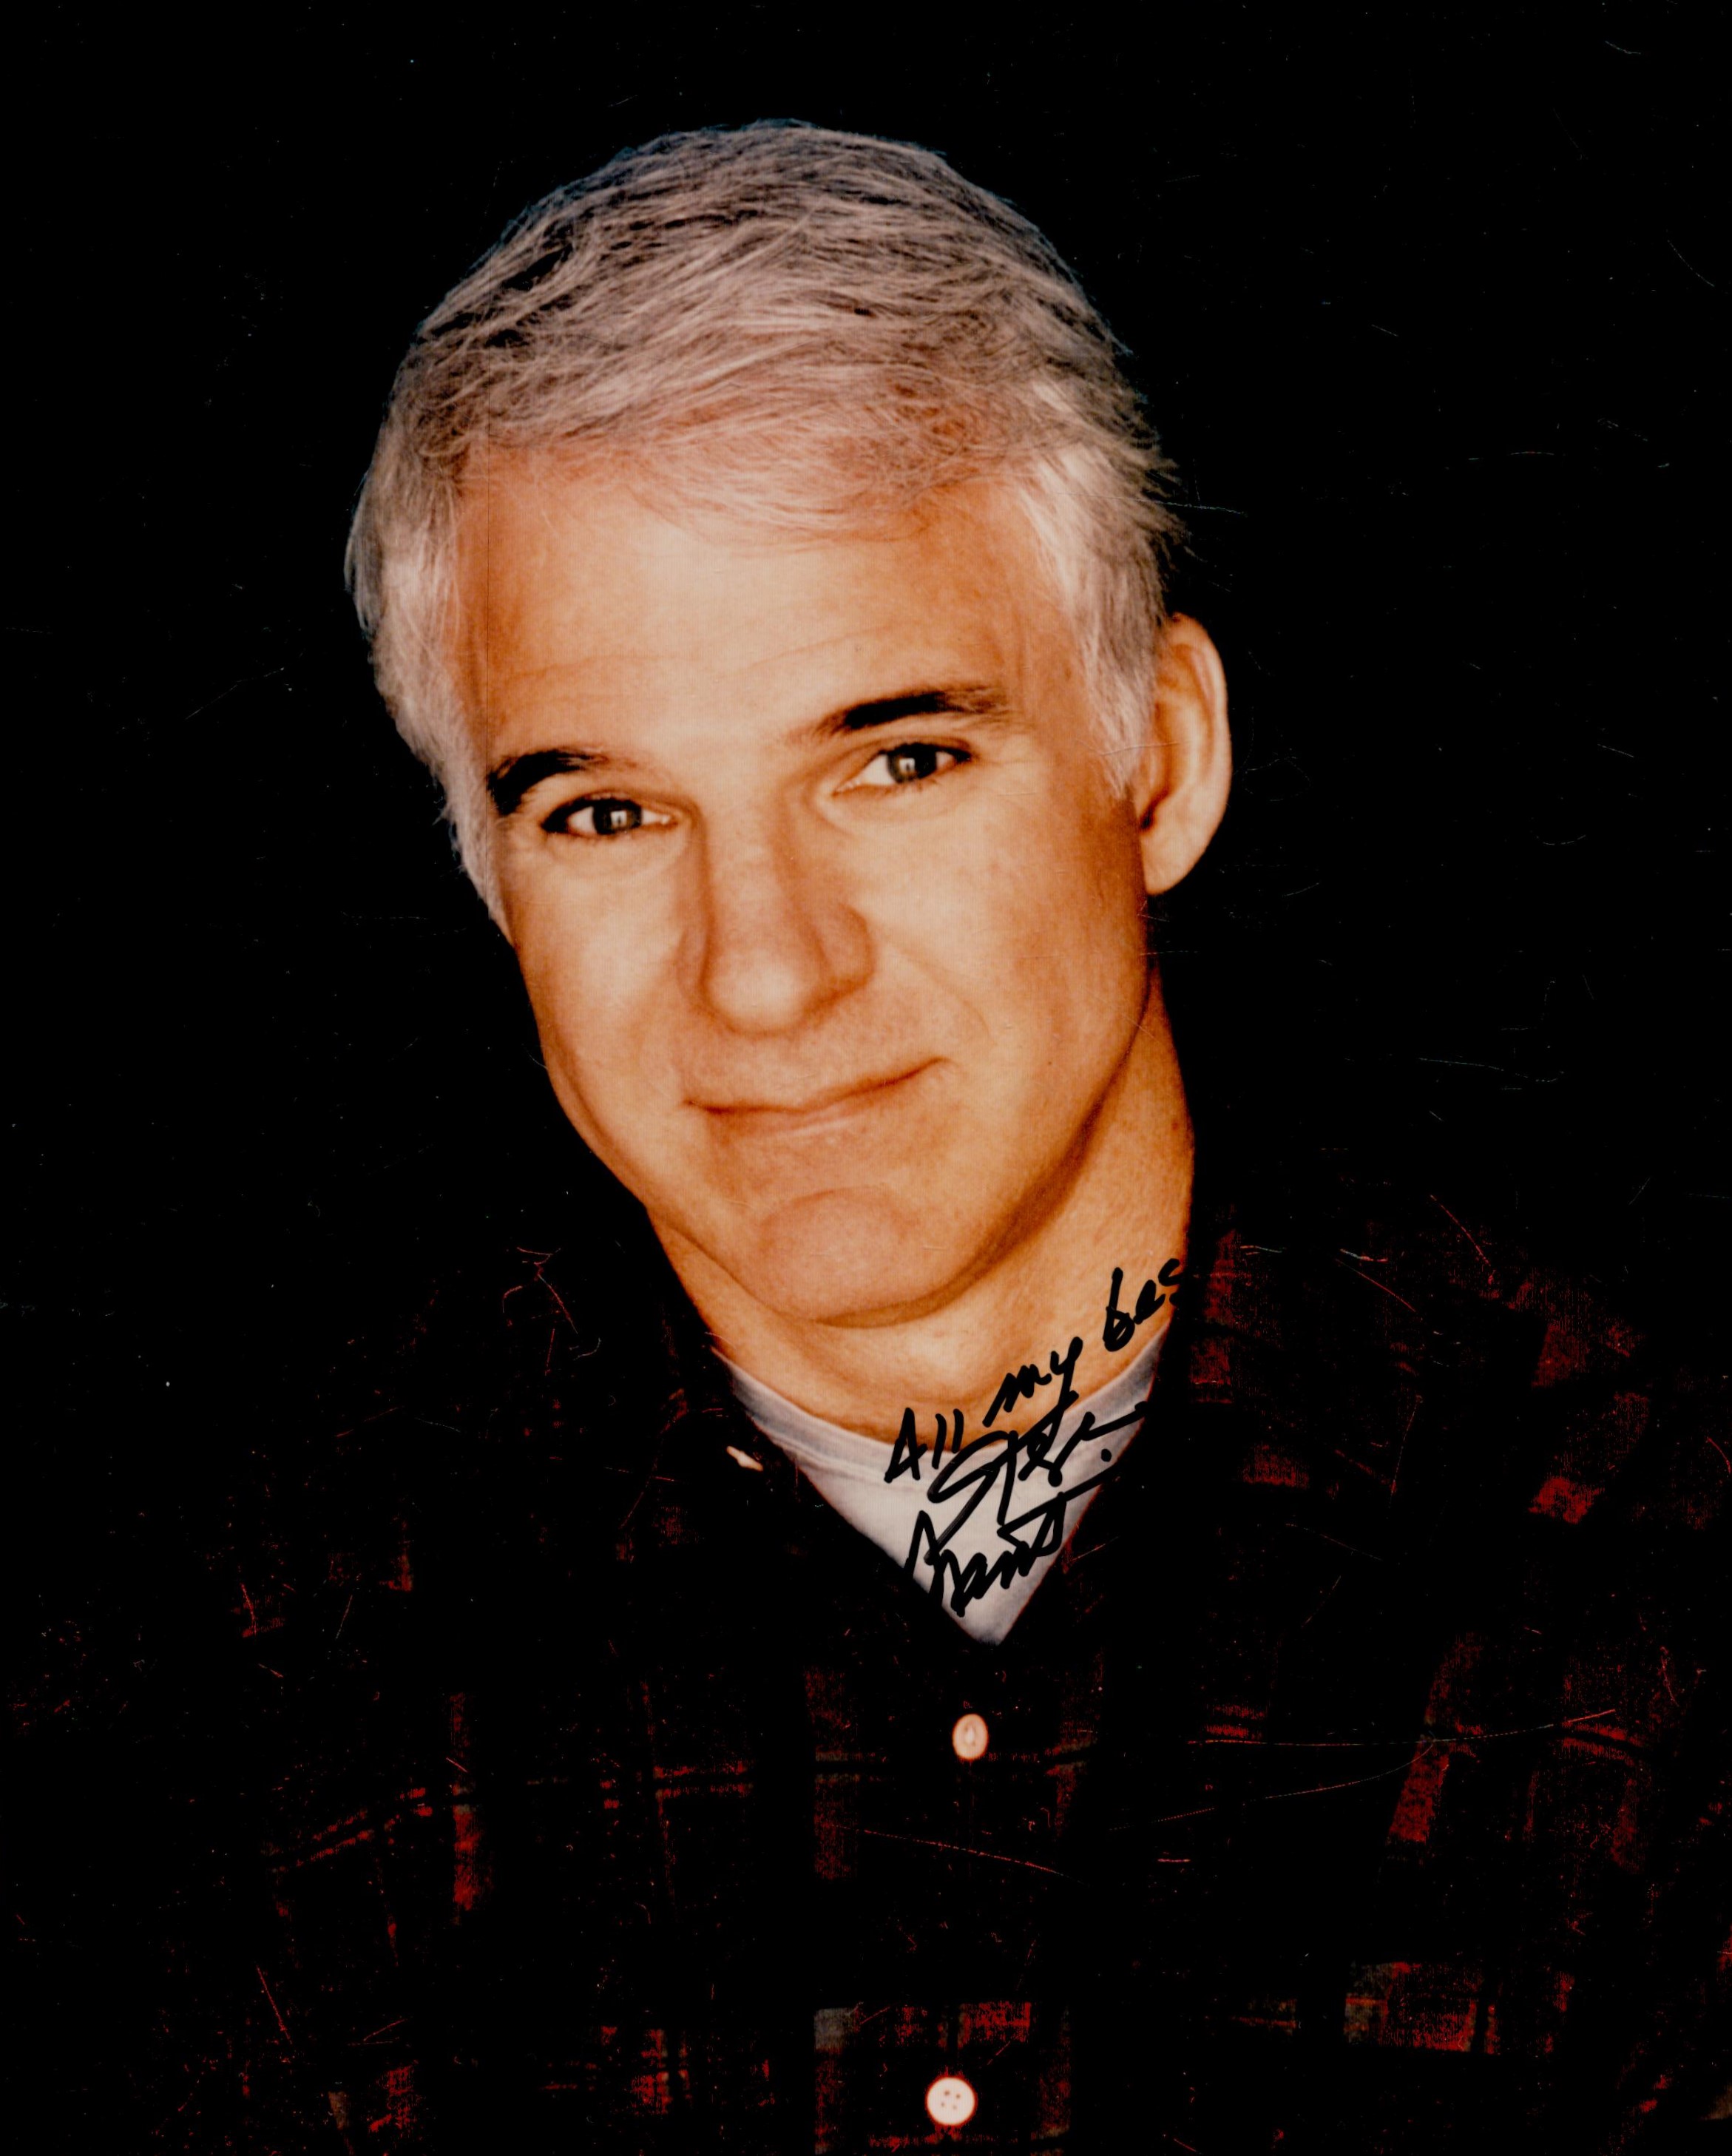 Steve Martin signed 10x8 inch colour photo. Good condition. All autographs come with a Certificate